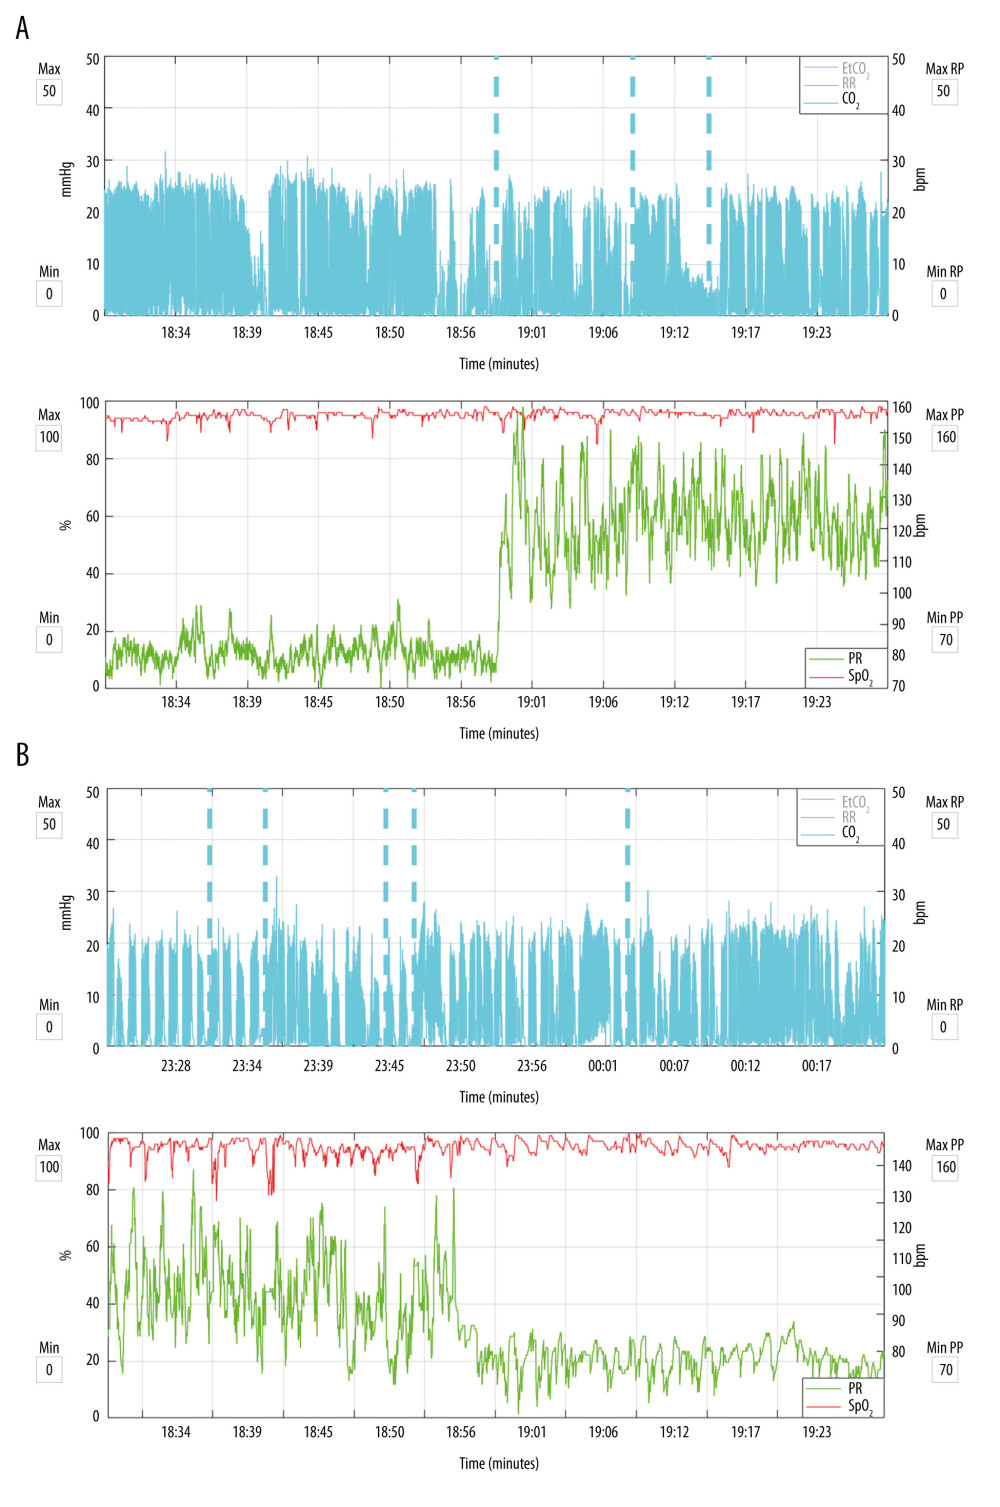 Postoperative abrupt change in heart rate (HR) consistent with atrial fibrillation in a 75-year-old man. The top panel shows exhaled end-tidal carbon dioxide (etCO2, represented by blue lines) measured with the Microstream™ capnography monitor. The dashed blue lines are alerts generated by apneic episodes (no breath detected for >30 s). The bottom panel shows oxyhemoglobin saturation (red line for SpO2) and HR (green line) measured with Nellcor™ pulse oximetry. In figure A, there is an abrupt change in HR from approximately 80 to 90 beats per minute (bpm) to a highly variable rate of 100 to 150 bpm. This change coincides with an apneic episode. In figure B, after 5 hours, there is another abrupt change, with the HR returning to the 80- to 90-bpm range. Also note the intermittent hypoxemic episodes that coincide with apneic episodes. EtCO2 – end-tidal carbon dioxide; RR – respiratory rate; SpO2 – oxyhemoglobin saturation; PR – pulse rate.